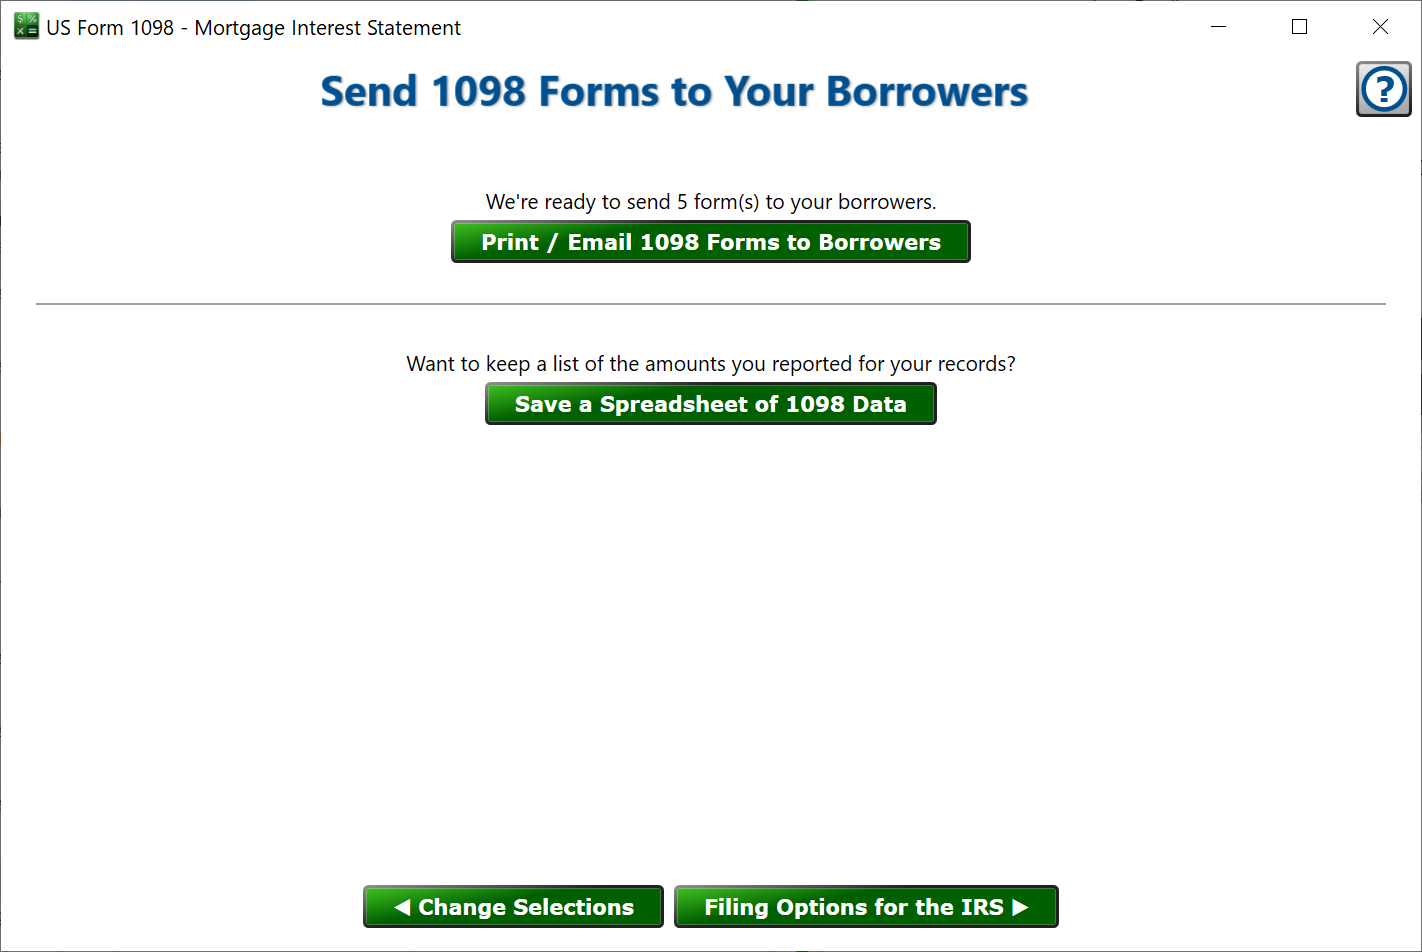 Form 1098 Information is Missing or Invalid